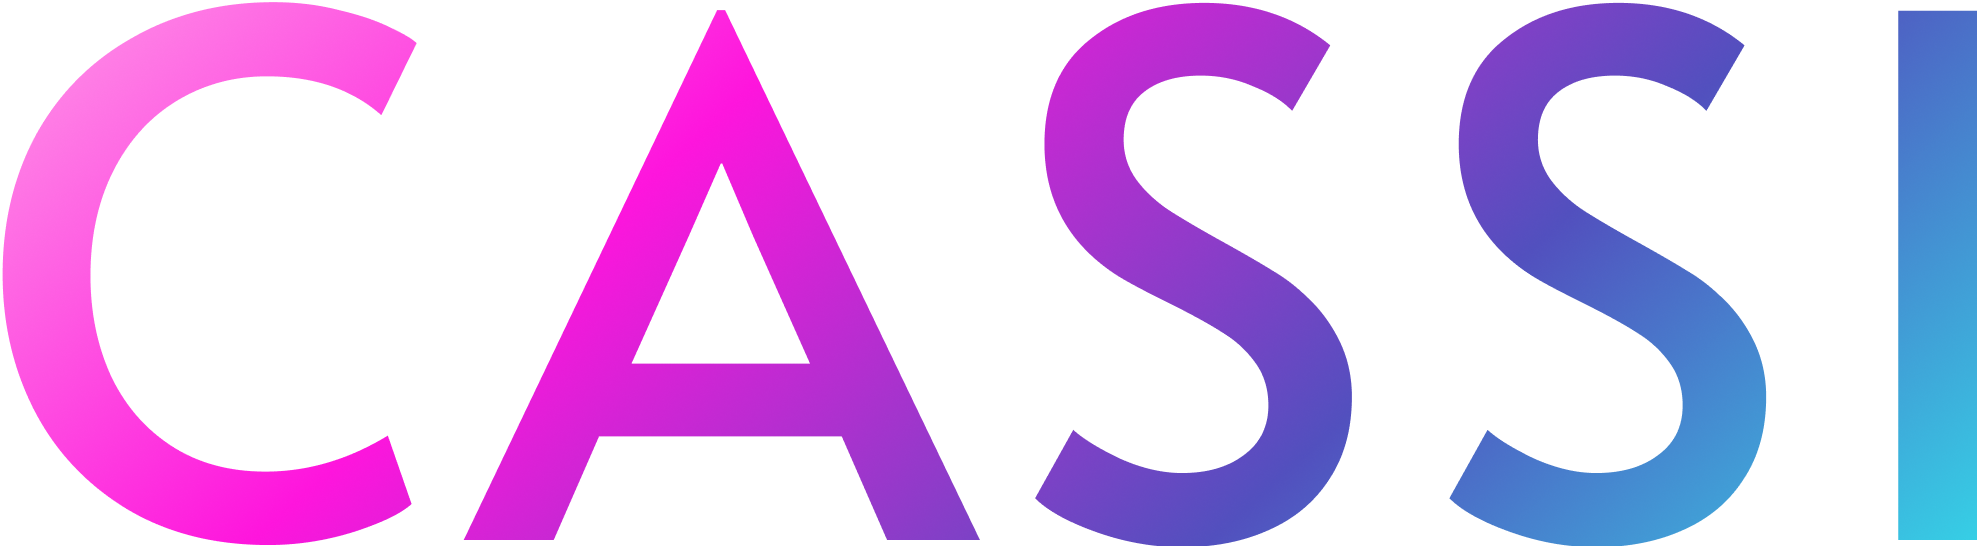 CASSI-One platform for all your Generative AI needs